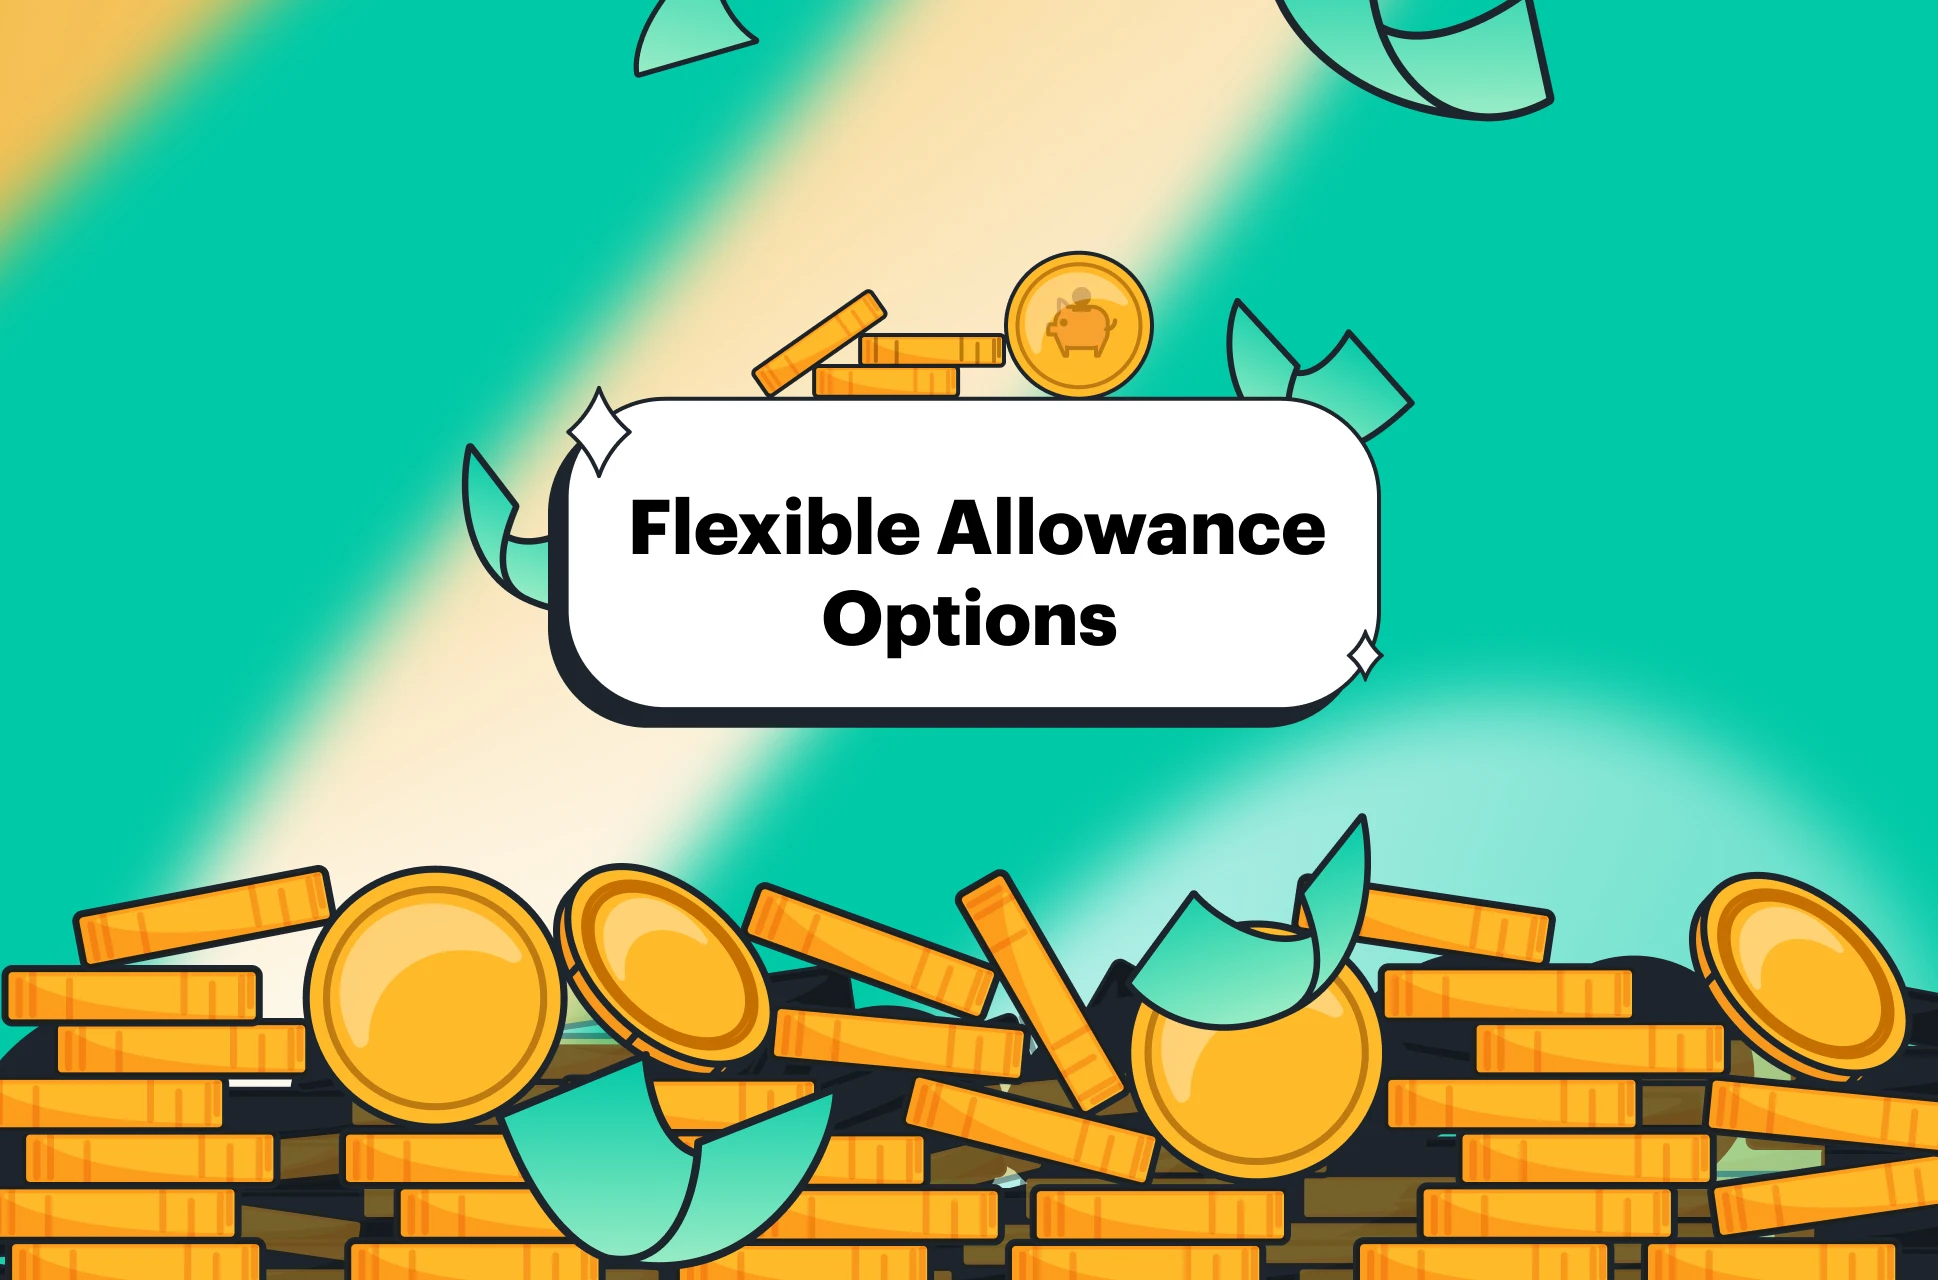 Greenlight flexible allowance options with yellow coins and green bills background